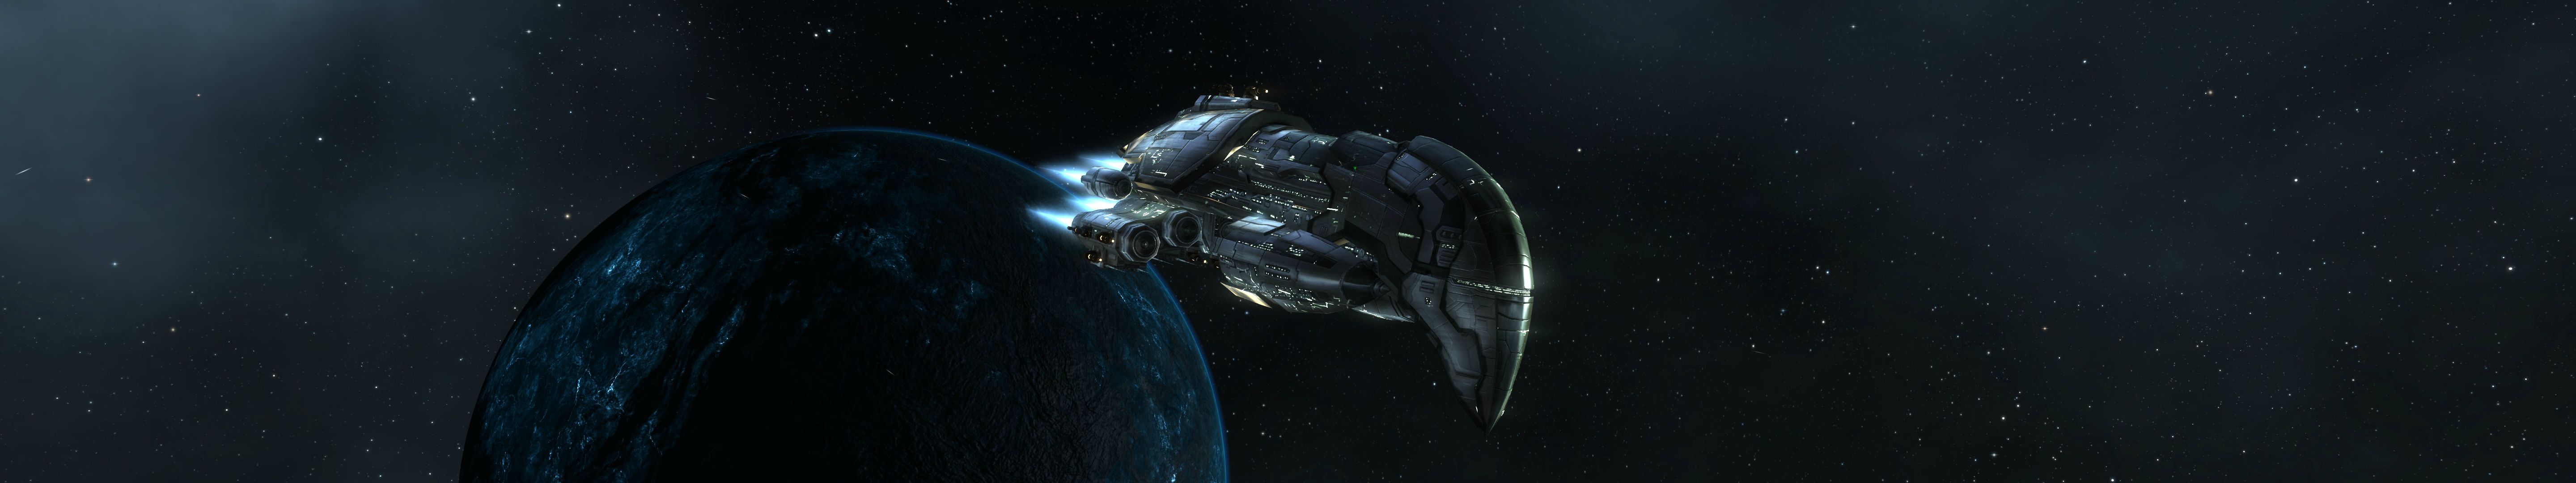 1 Spaceship HD Wallpapers | Backgrounds - Wallpaper Abyss